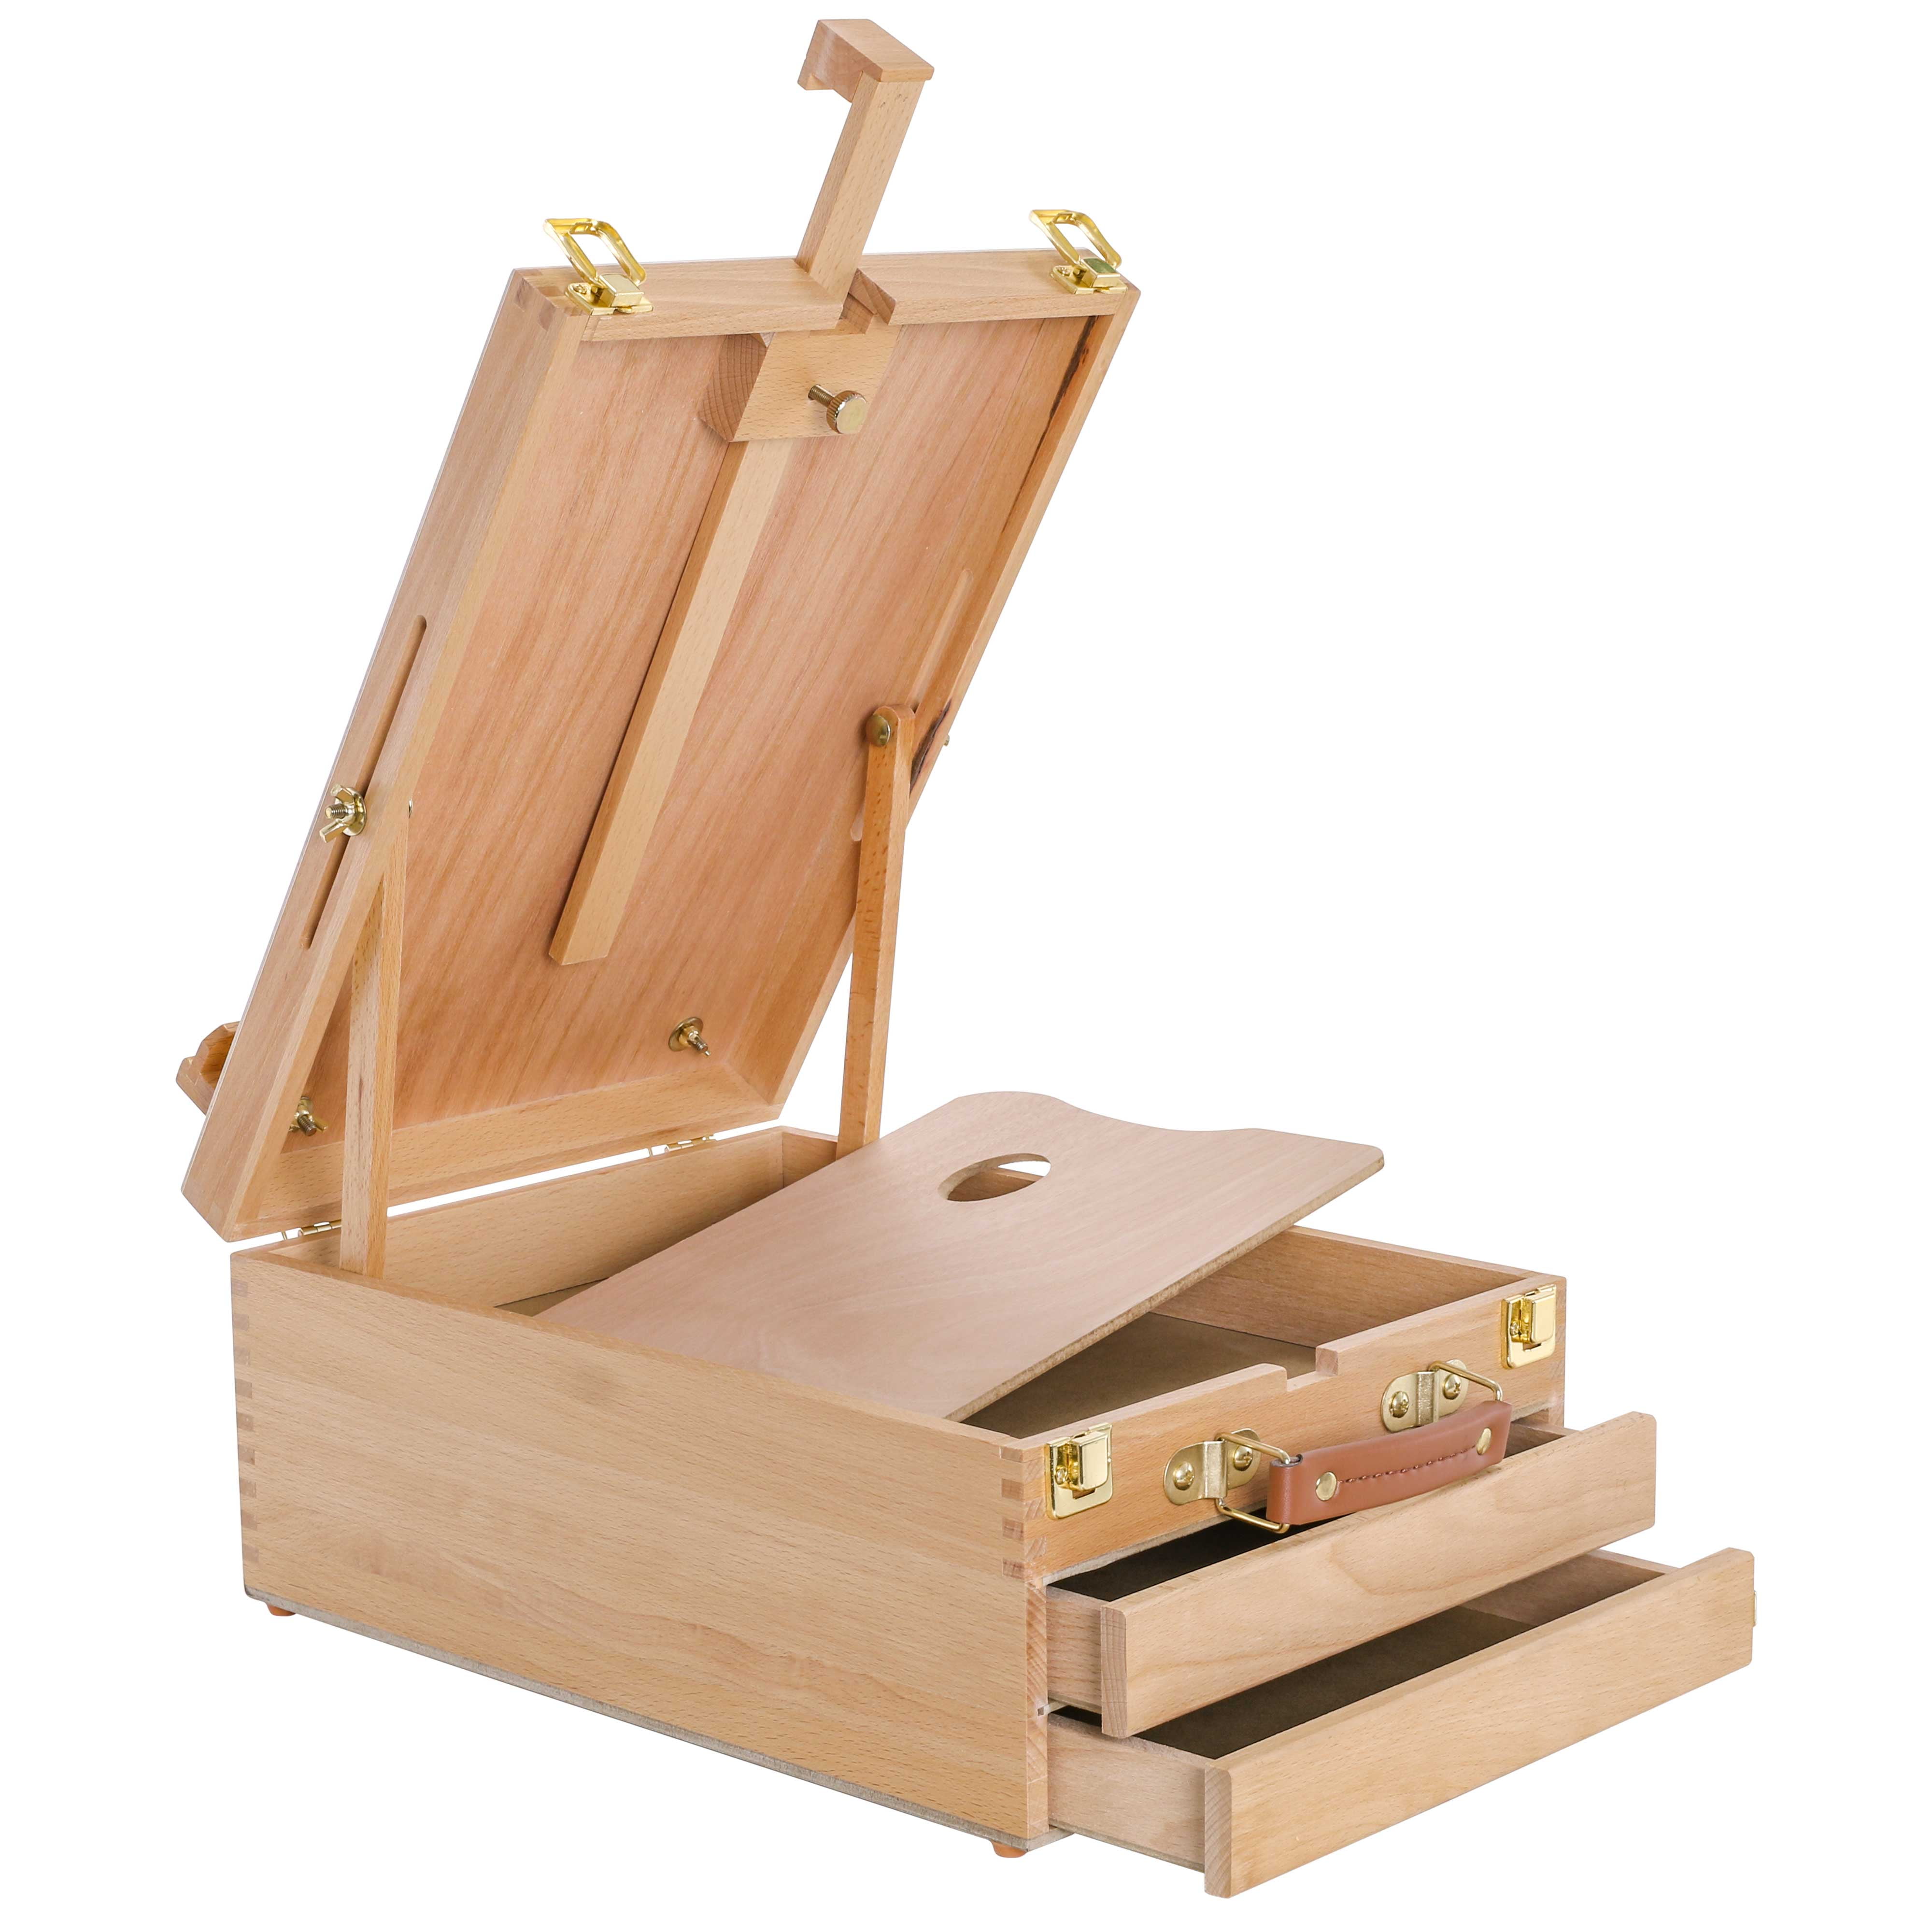 Wood Desk Table Easel - Handcrafted Beechwood Desktop Easel & Wooden Art  Tabletop Box for Drawing, Painting, and Sketching with 3 Front Drawers for